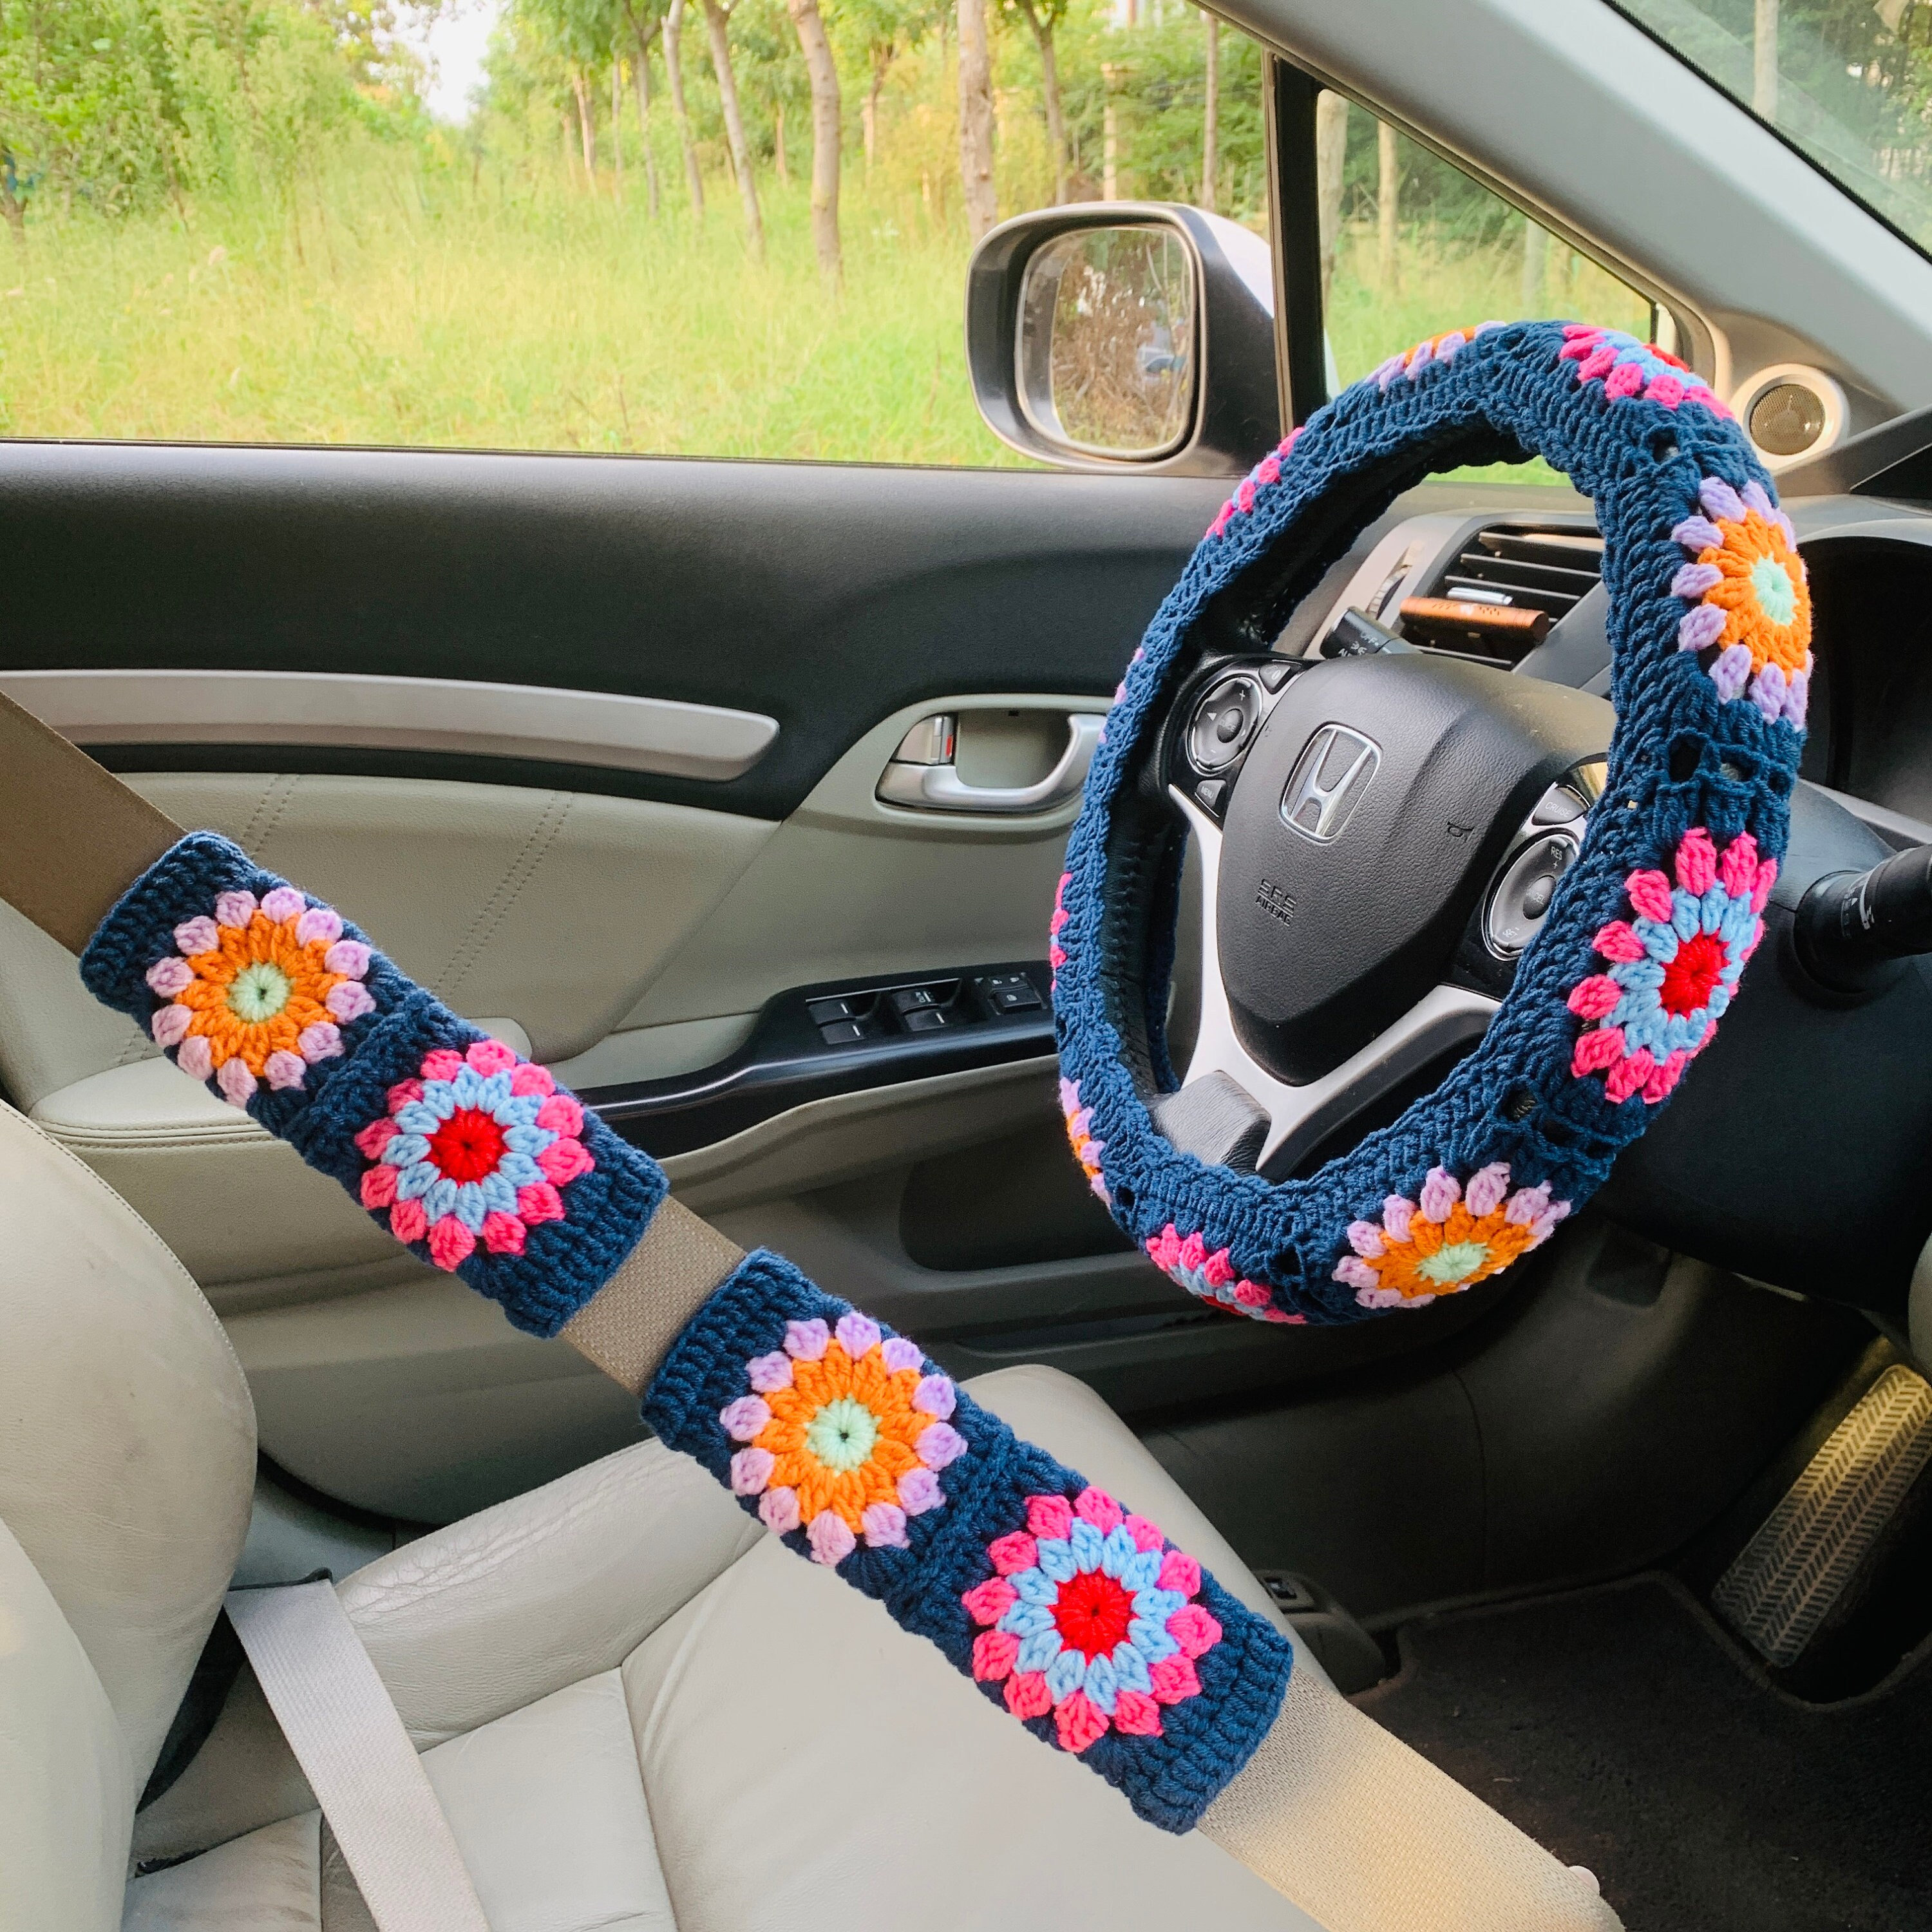 Retro Flower Daisy Steering Wheel Cover w/ Grip Liner Fits 14 14.5 15  Cloth